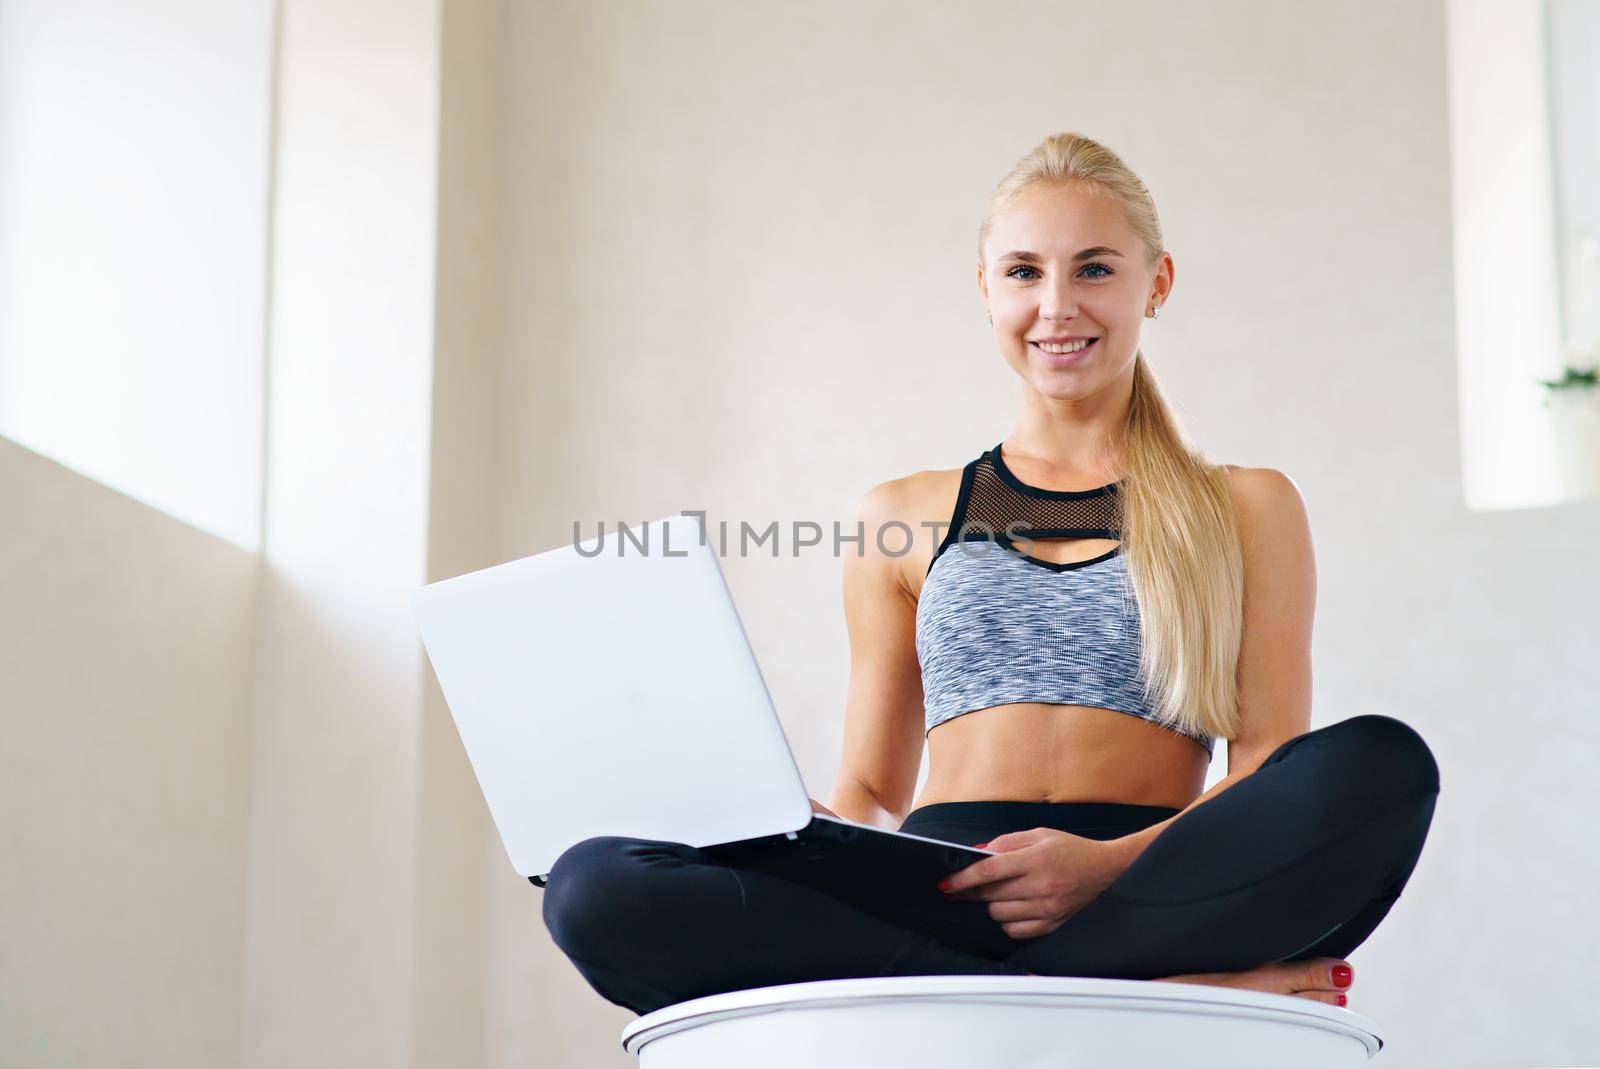 Sports business girl with laptop in lotus pose looks at camera and smiles